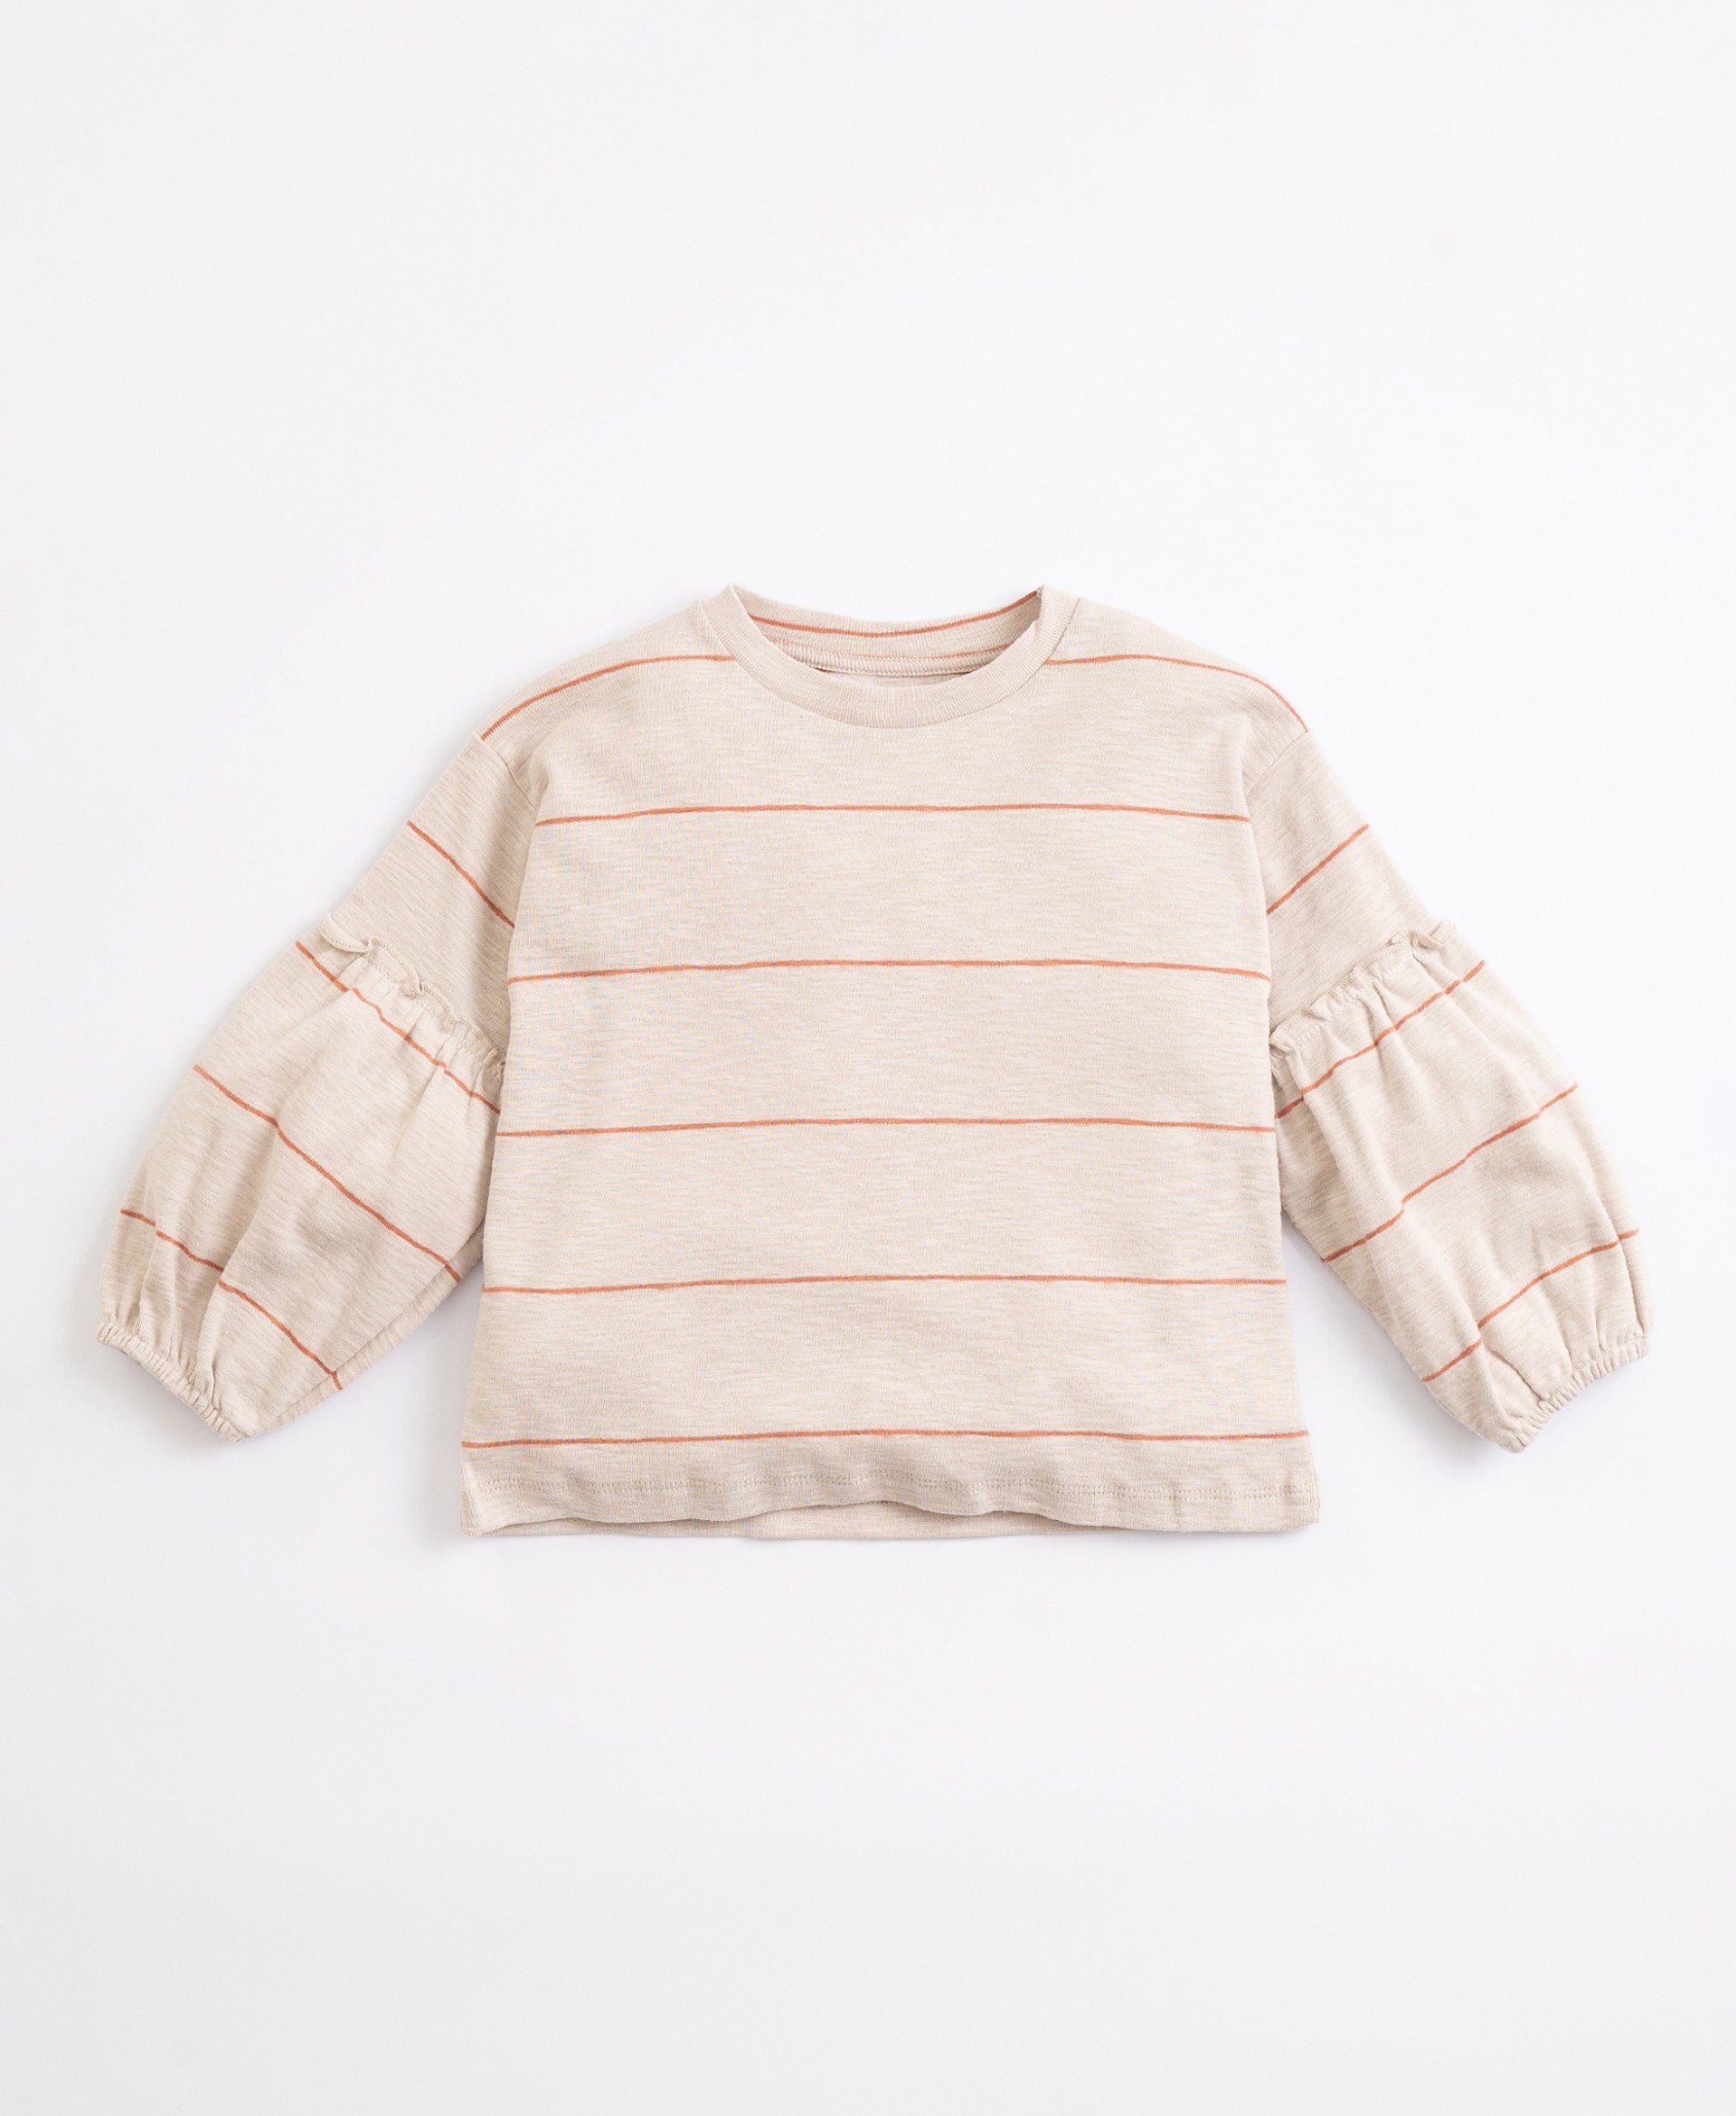 Striped jersey in organic cotton | Illustration